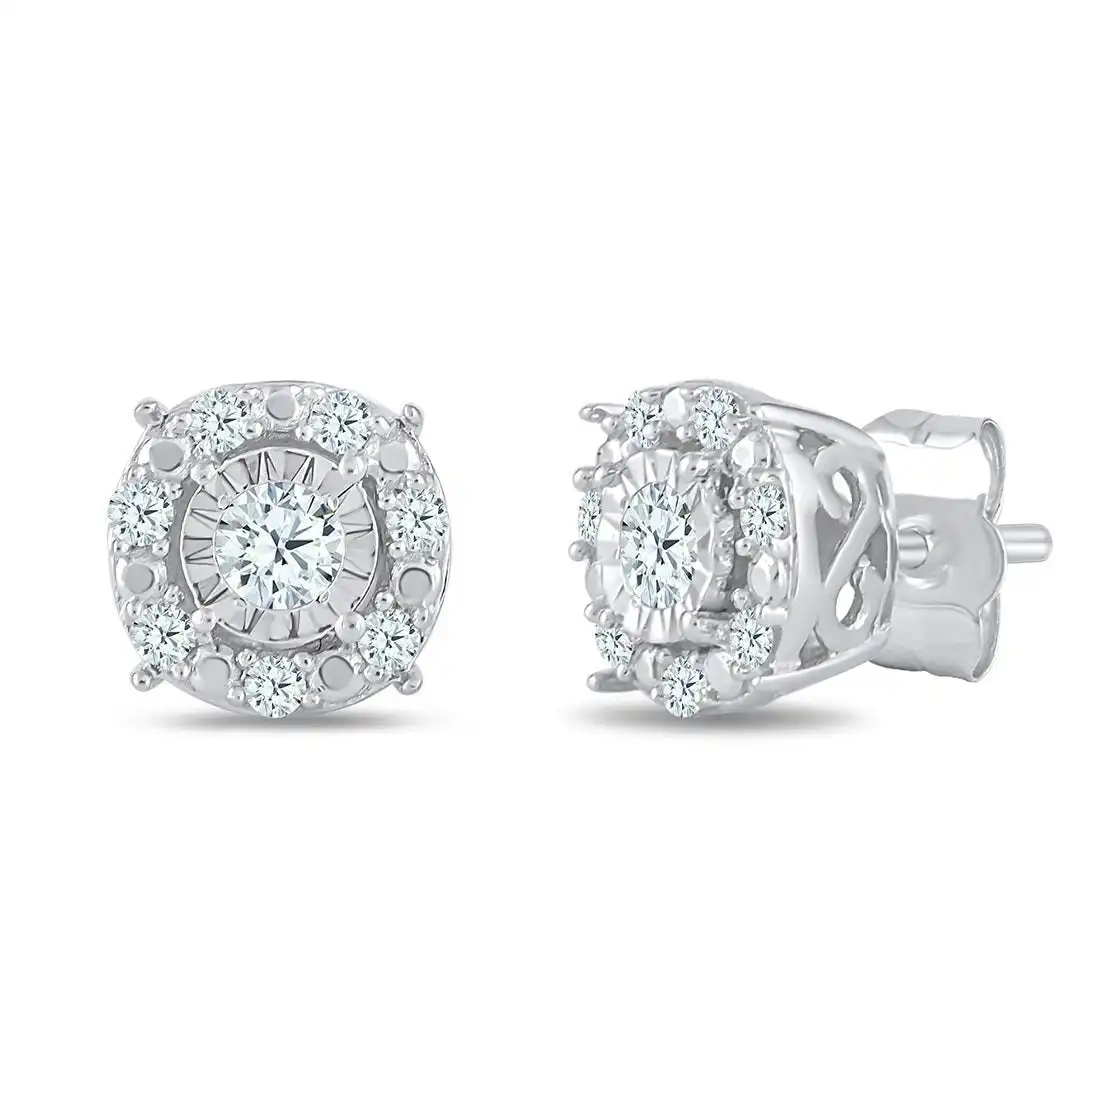 Tia Brilliant Miracle Halo Stud Earrings with 0.20ct of Diamonds in 9ct White Gold